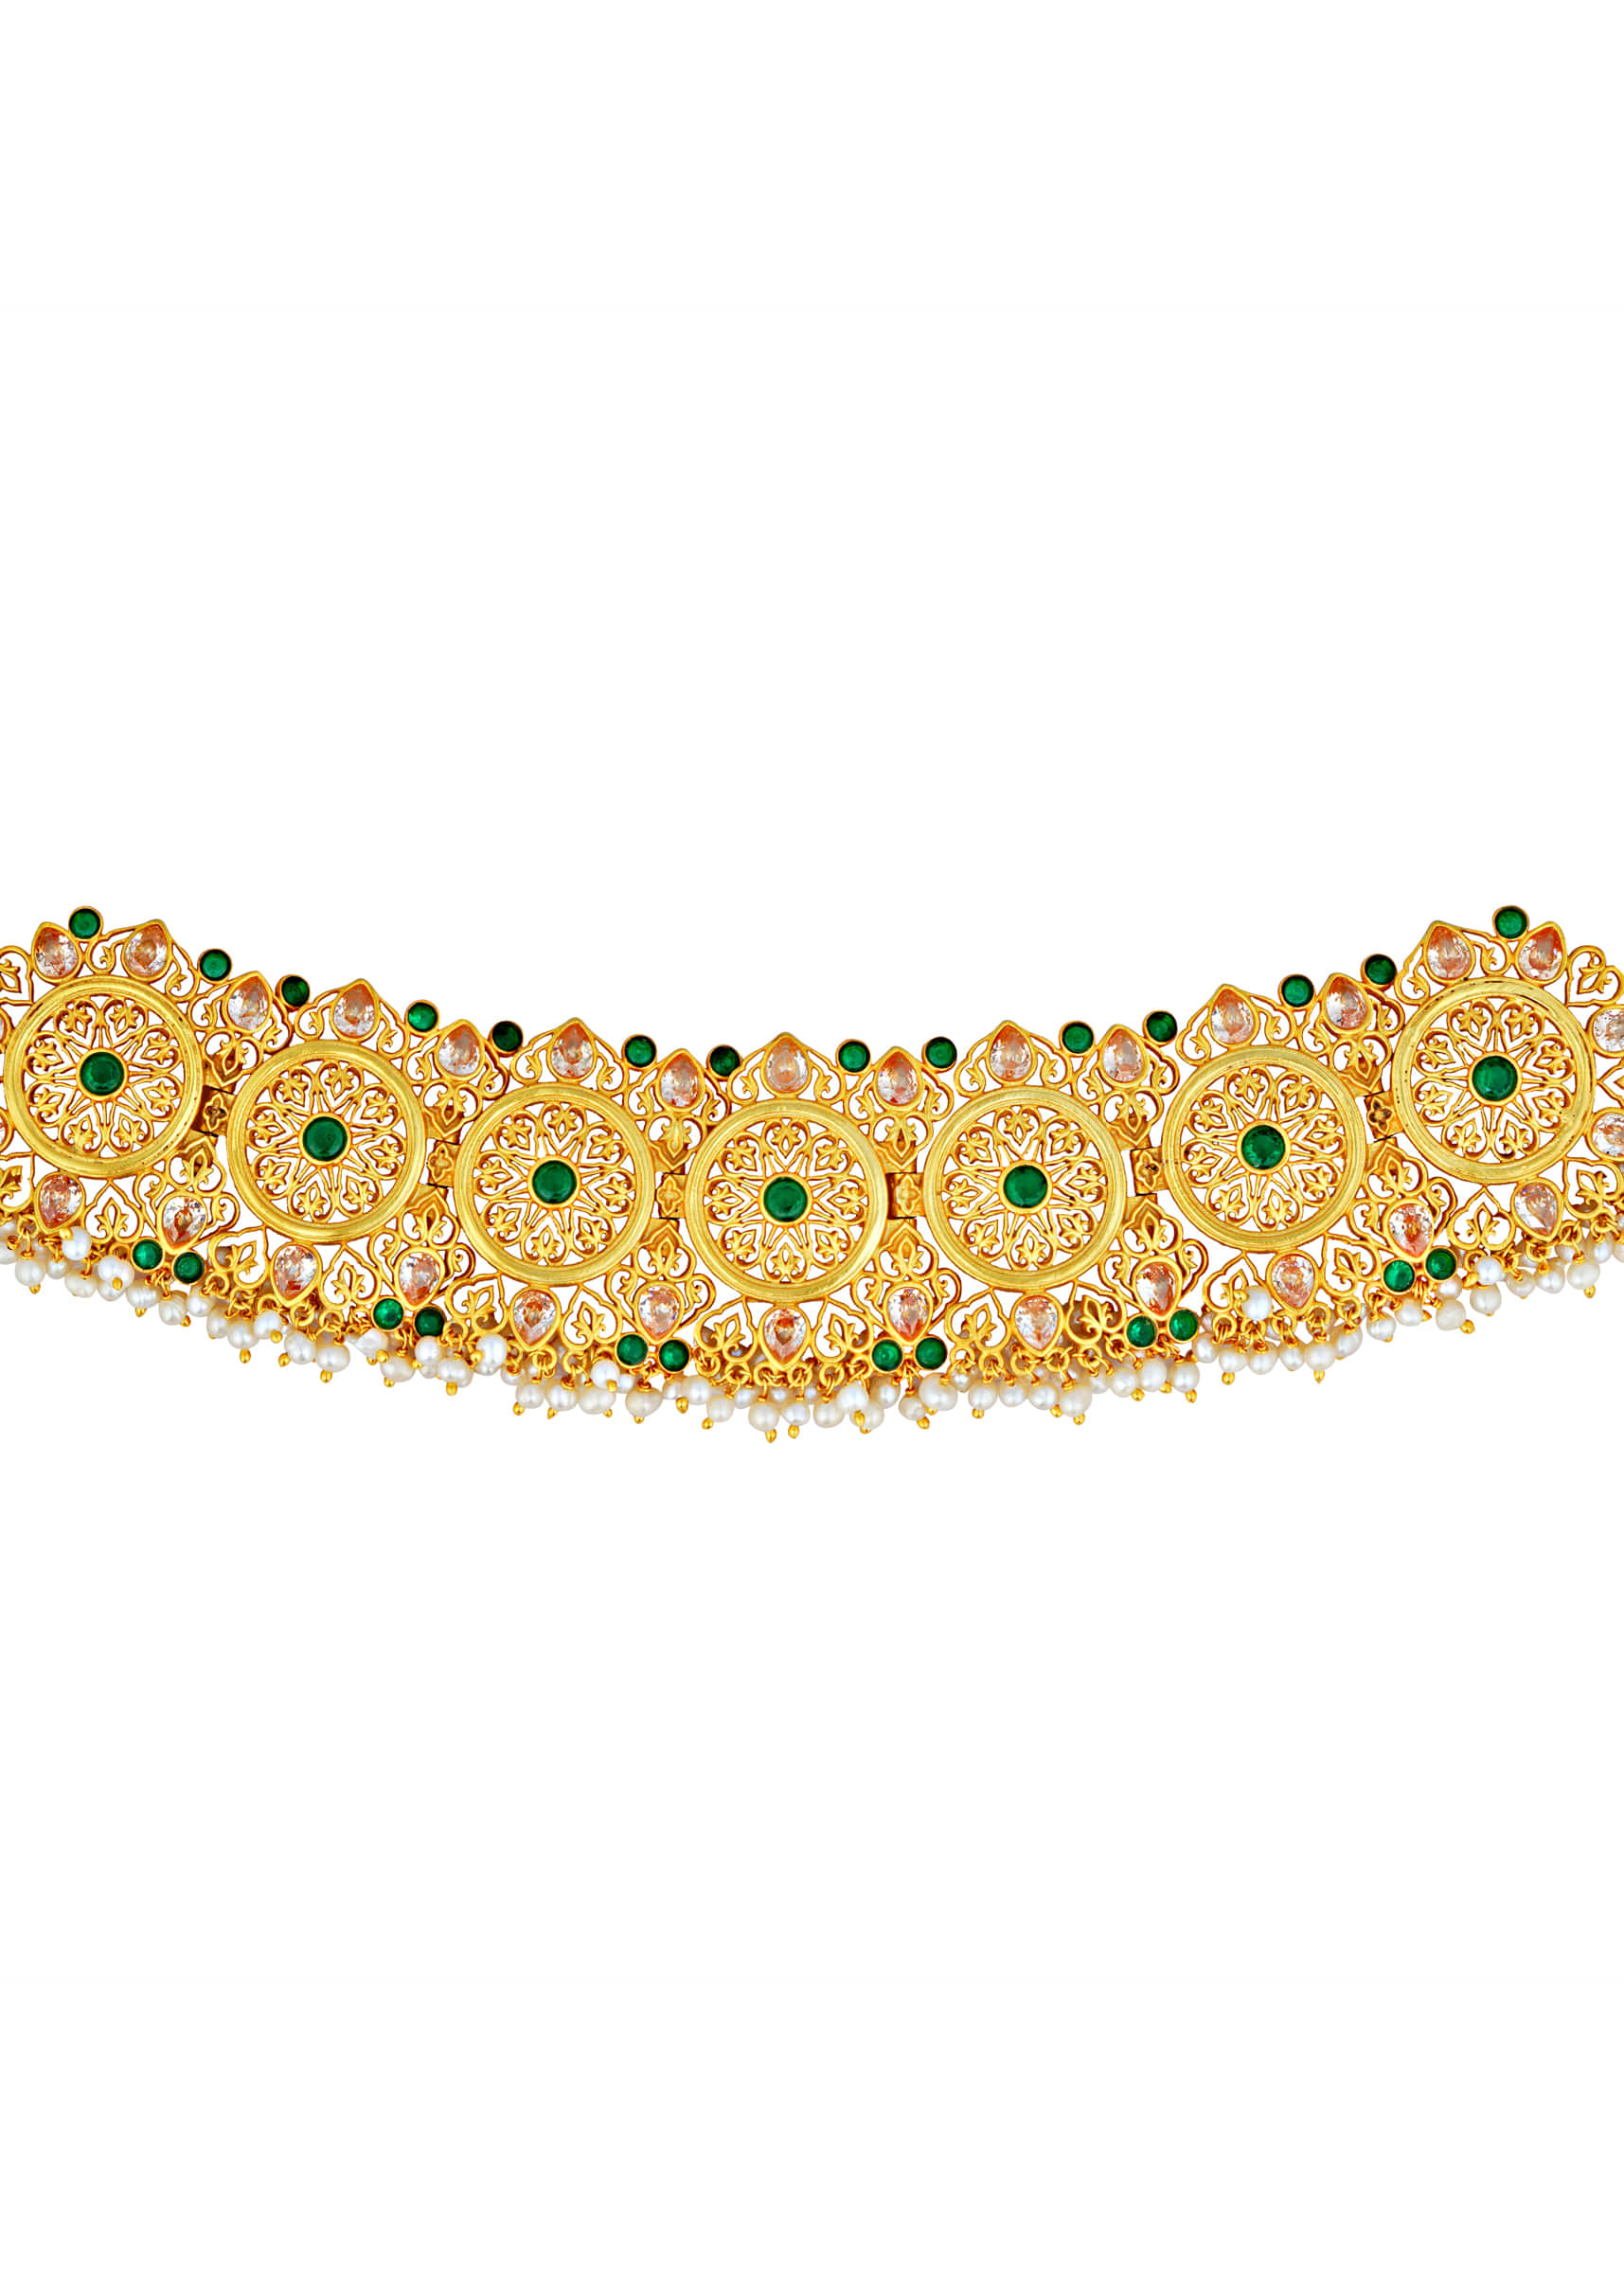 Gold Plated Jharoka Necklace In Floral Motifs With Green Cz And Delicate Pearls By Zariin